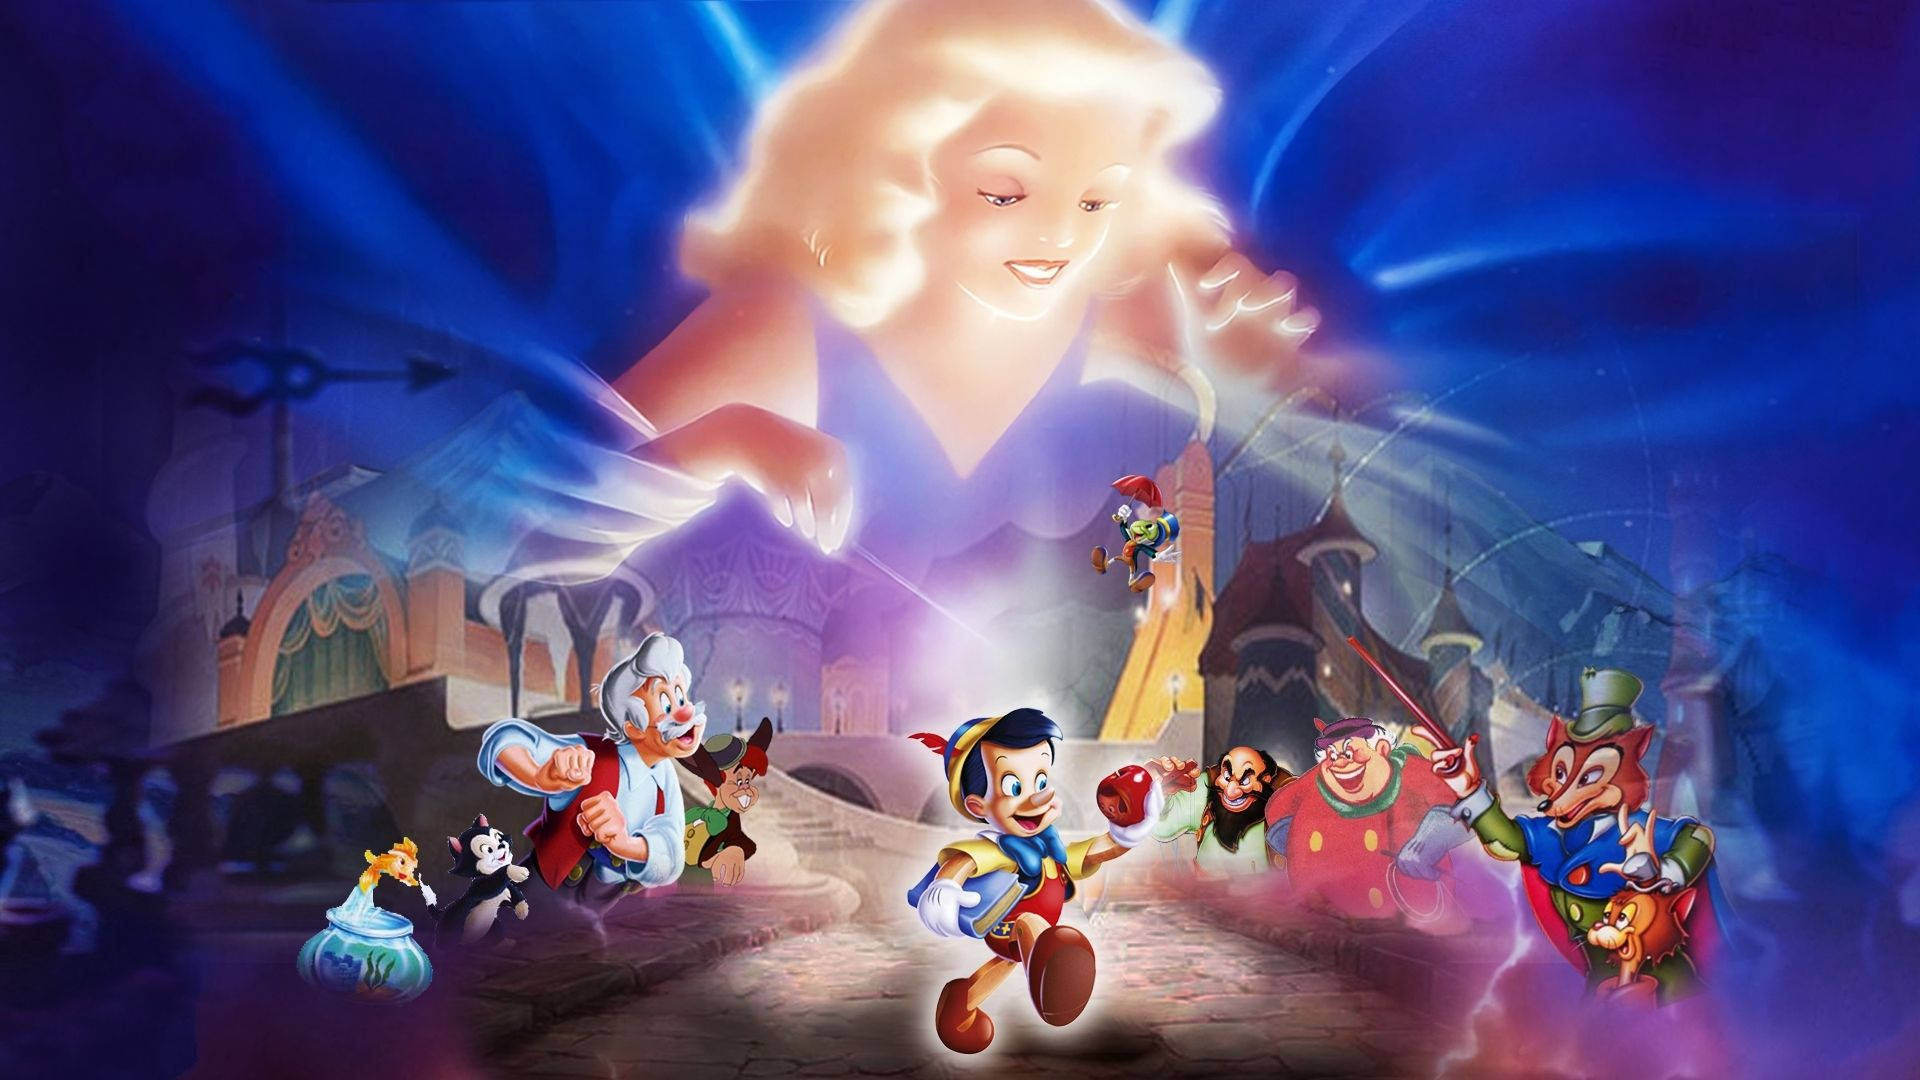 Pinocchio Characters Background